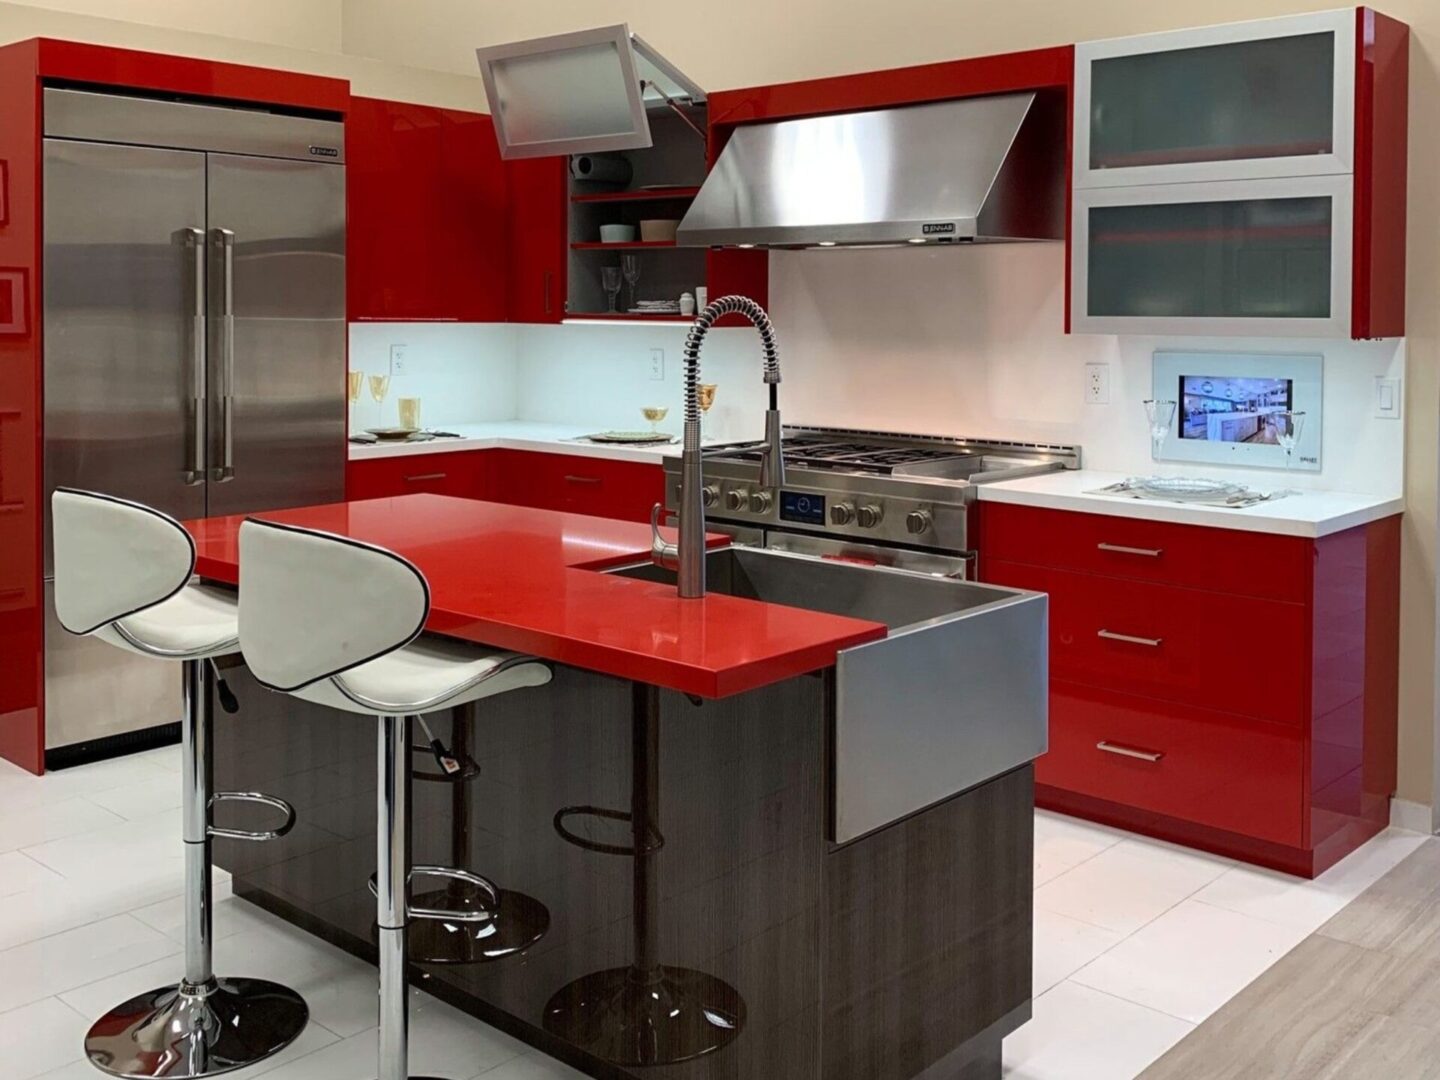 A kitchen with red and black cabinets, white counter tops.